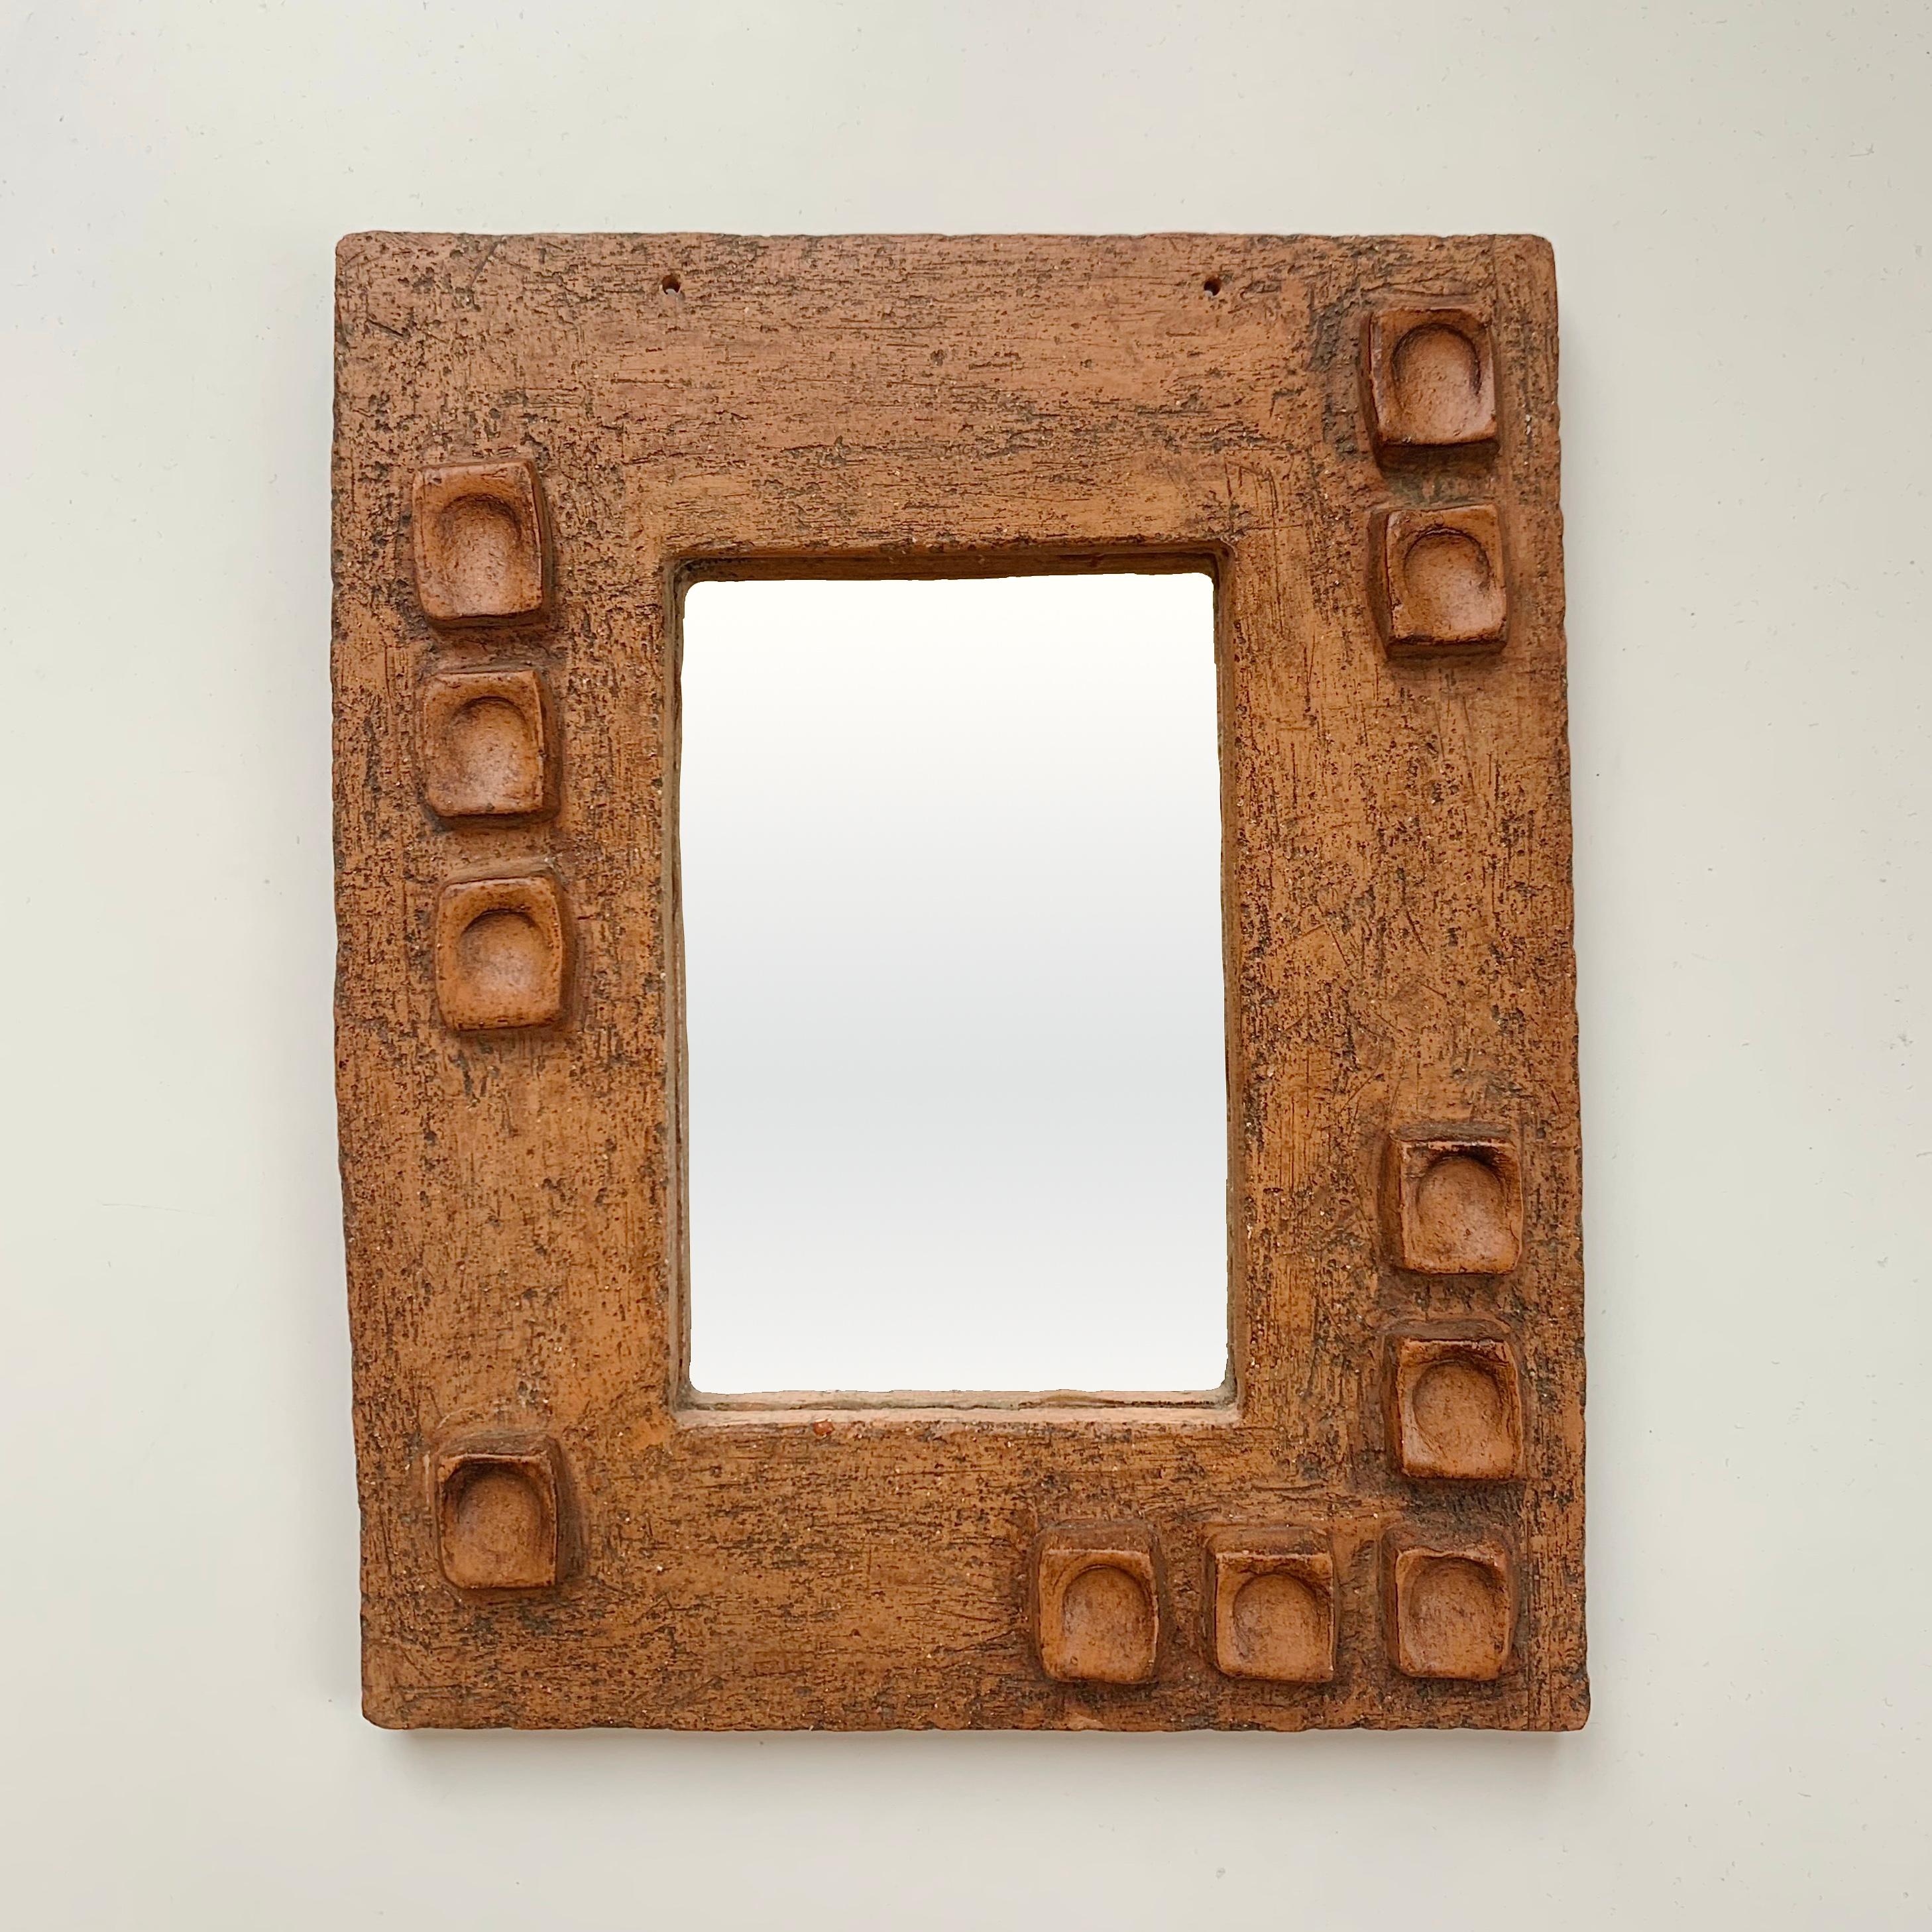 Mid-Century Modern Ceramic Mirror With Abstract Composition circa 1950, France.